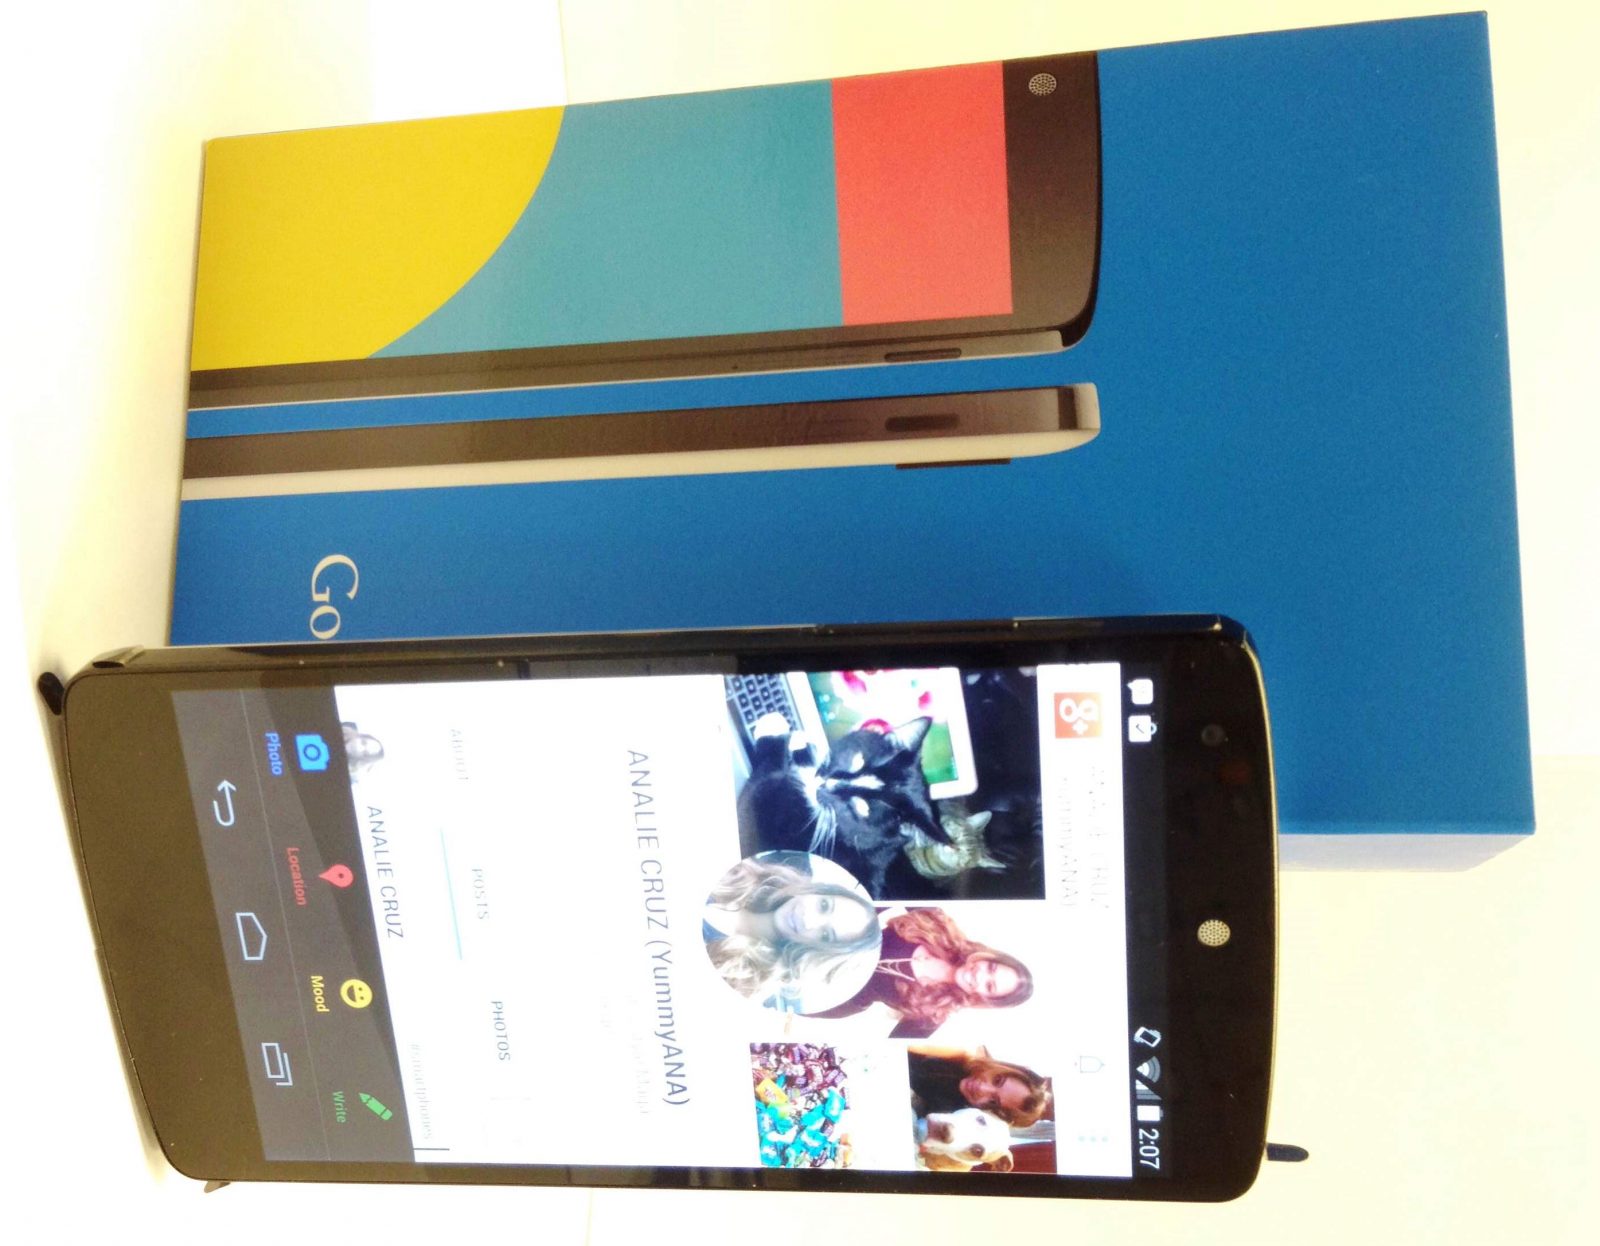 Google LG Nexus 5 Review Smartphone- Android KitKat 4.4 - Screen On